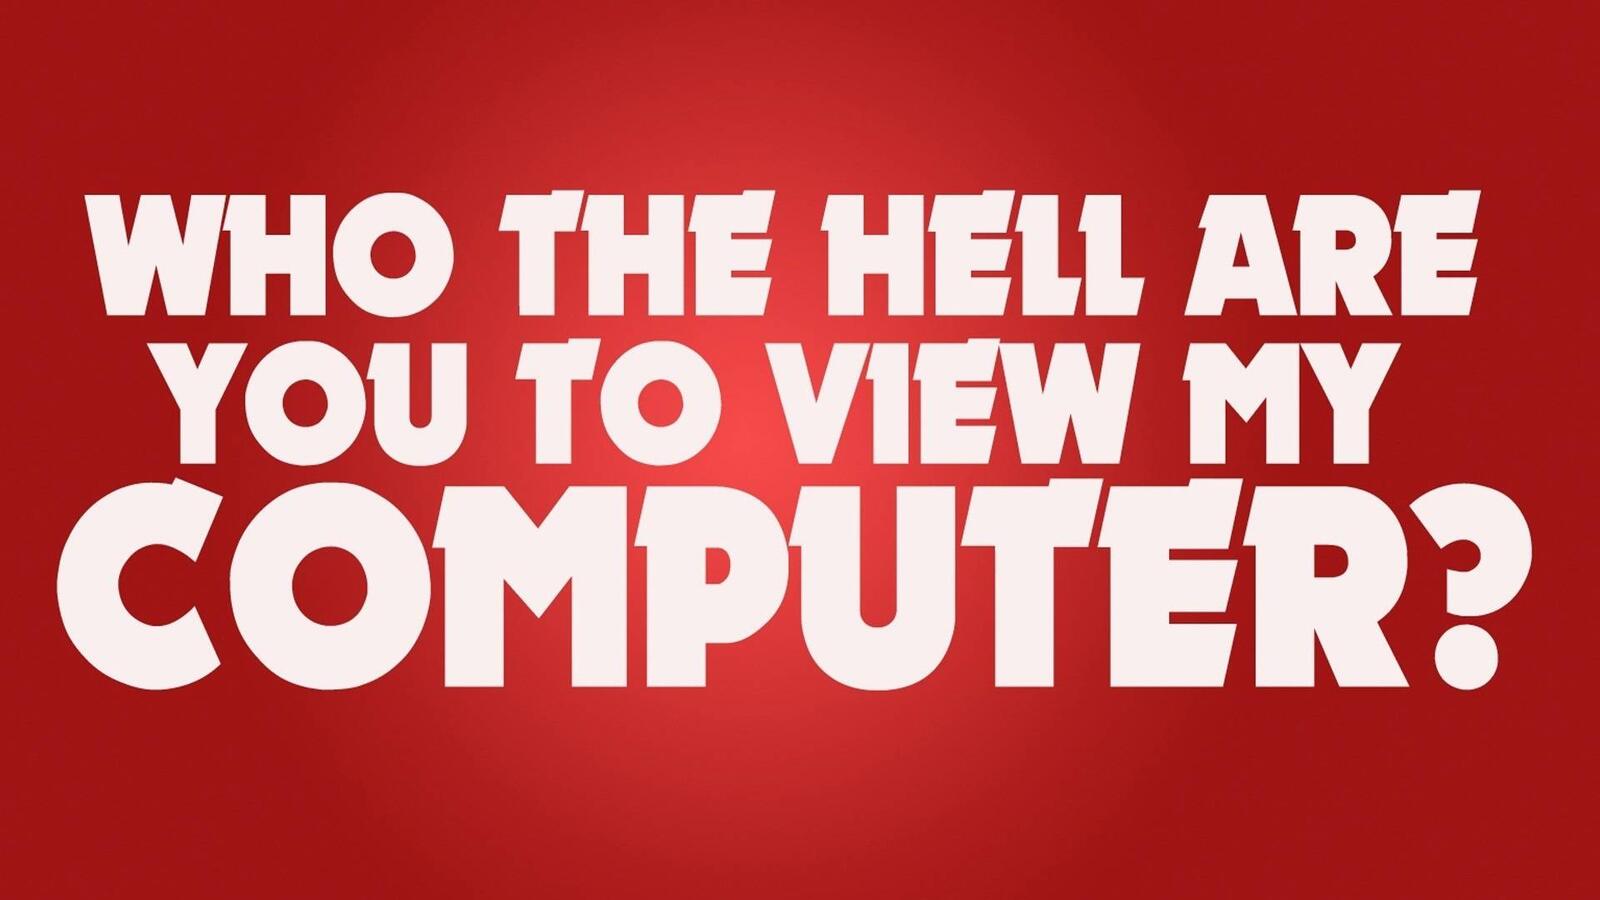 Wallpapers who the hell are you to view my computer lettering red background on the desktop